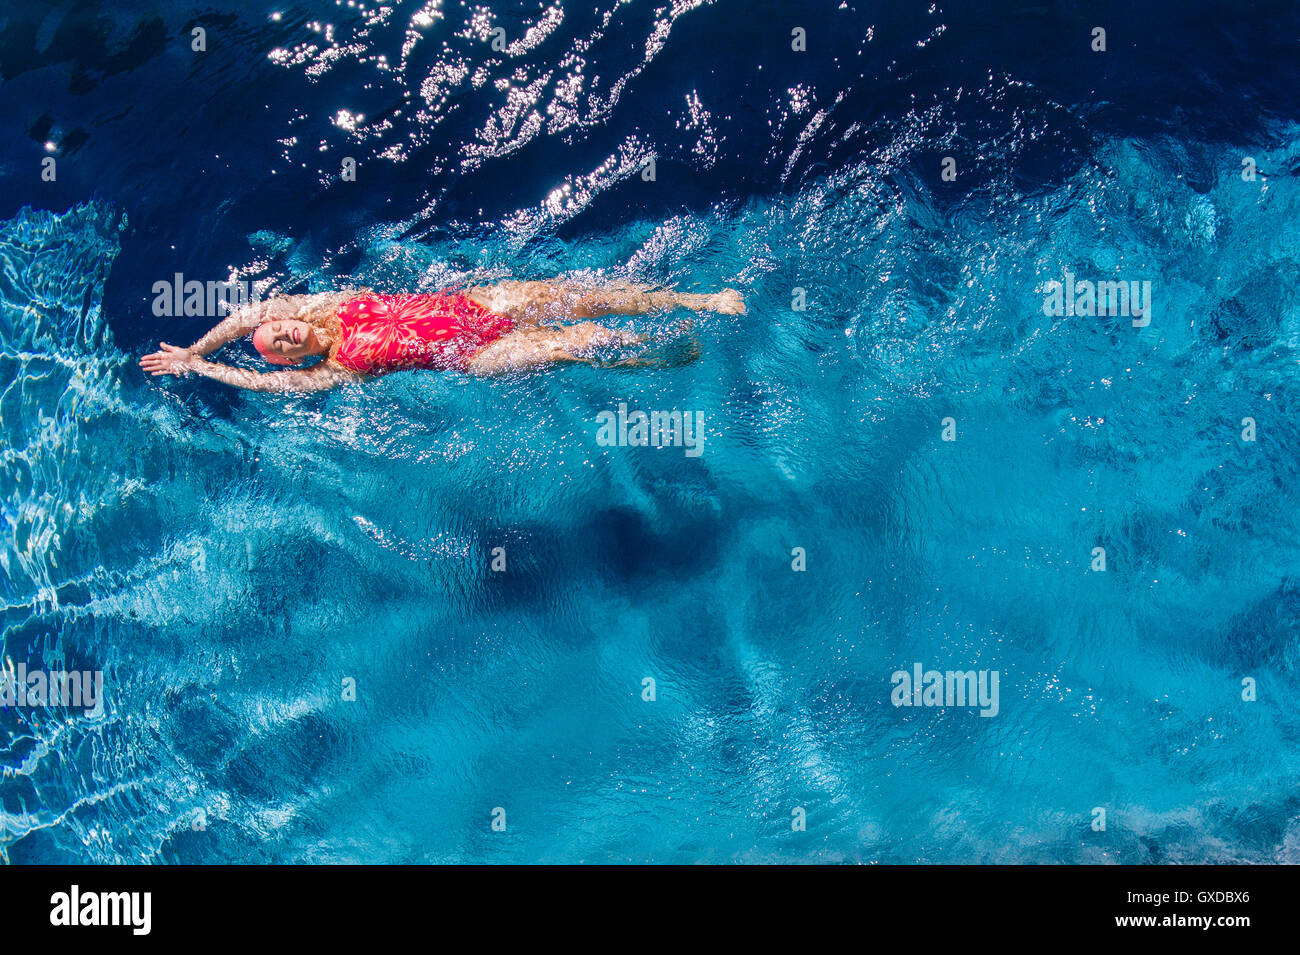 Overhead view of woman swimming on back in swimming pool Stock Photo